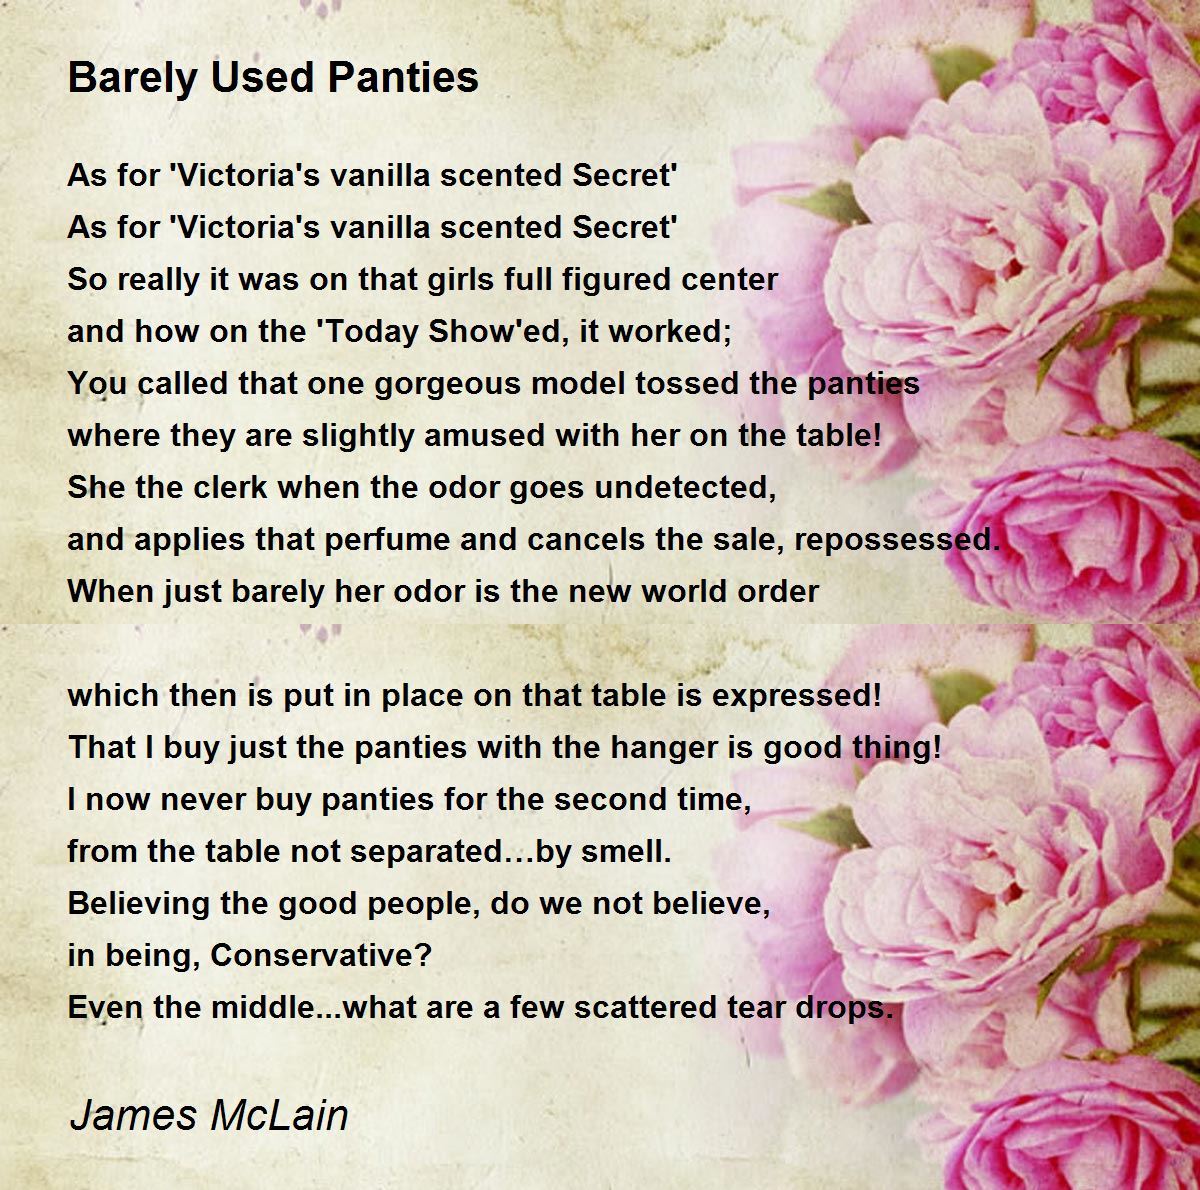 Barely Used Panties - Barely Used Panties Poem by James McLain